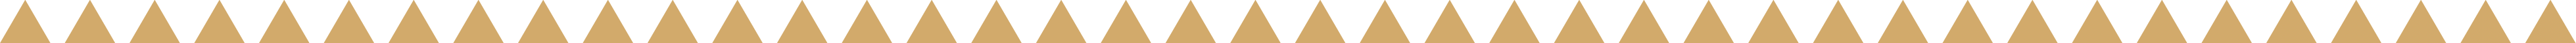 small gold triangles page divider